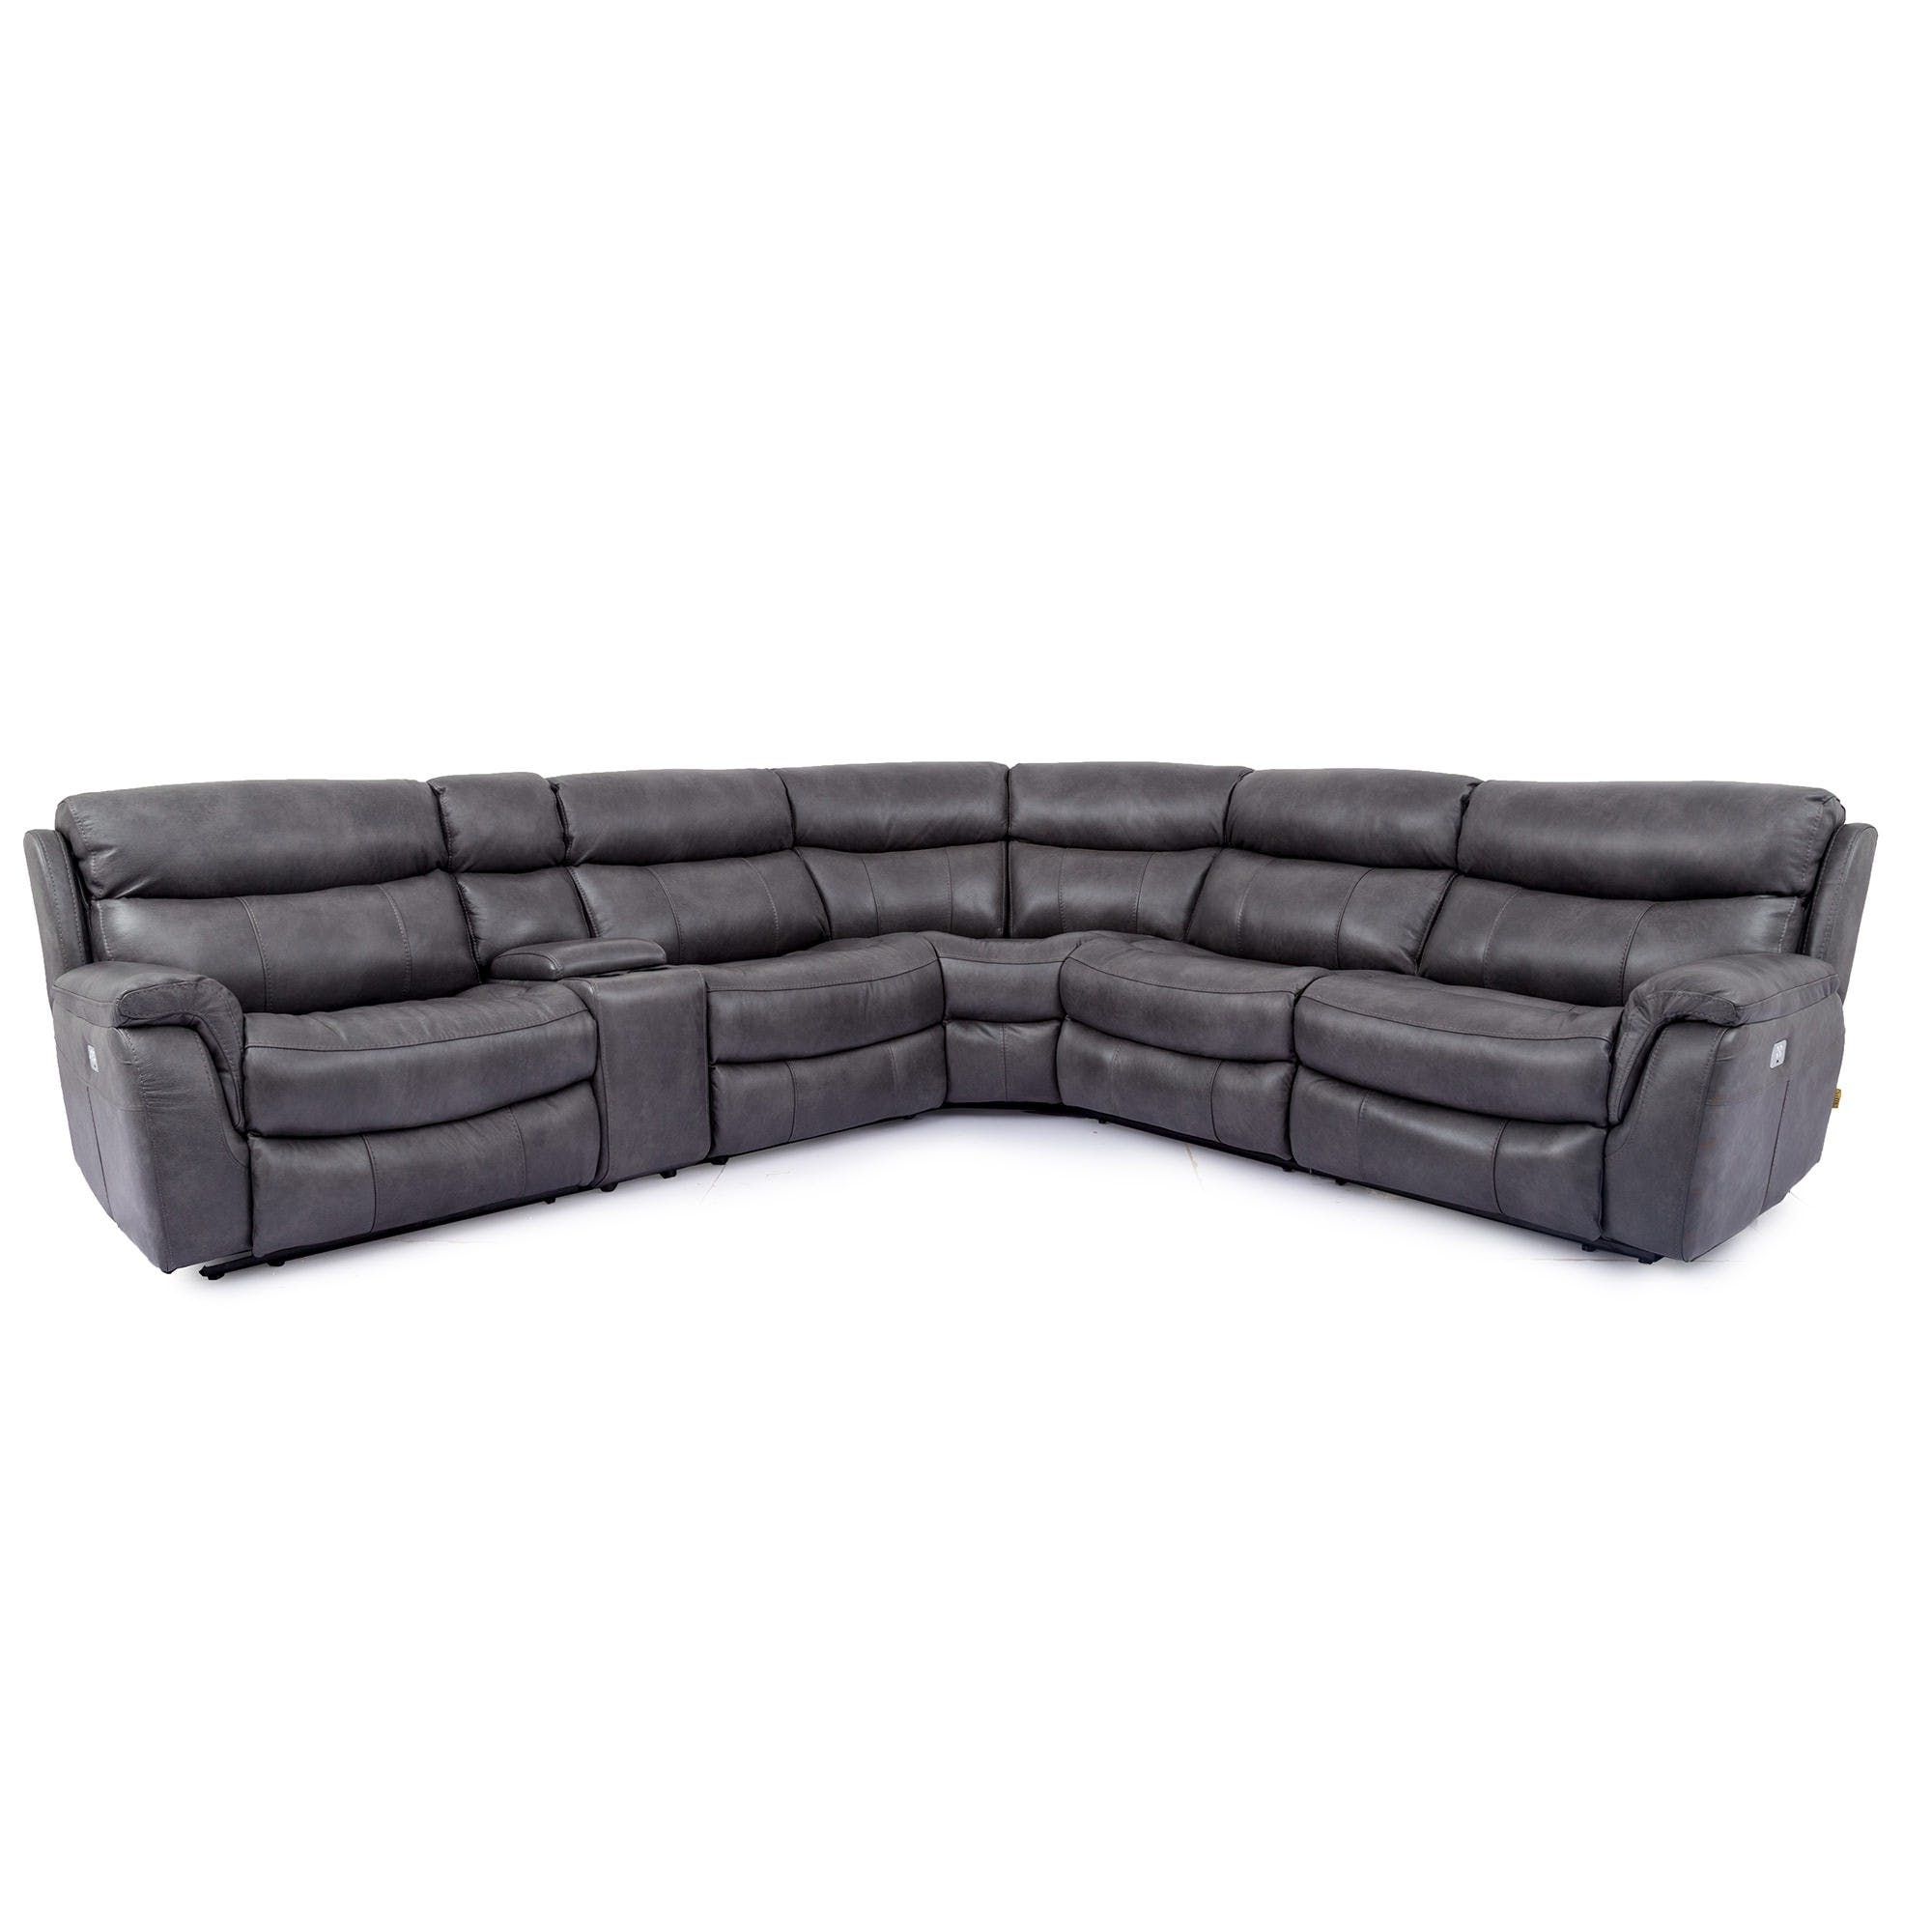 Kanada Versicherung With Newest Mcdade Graphite 2 Piece Sectionals With Laf Chaise (View 11 of 20)